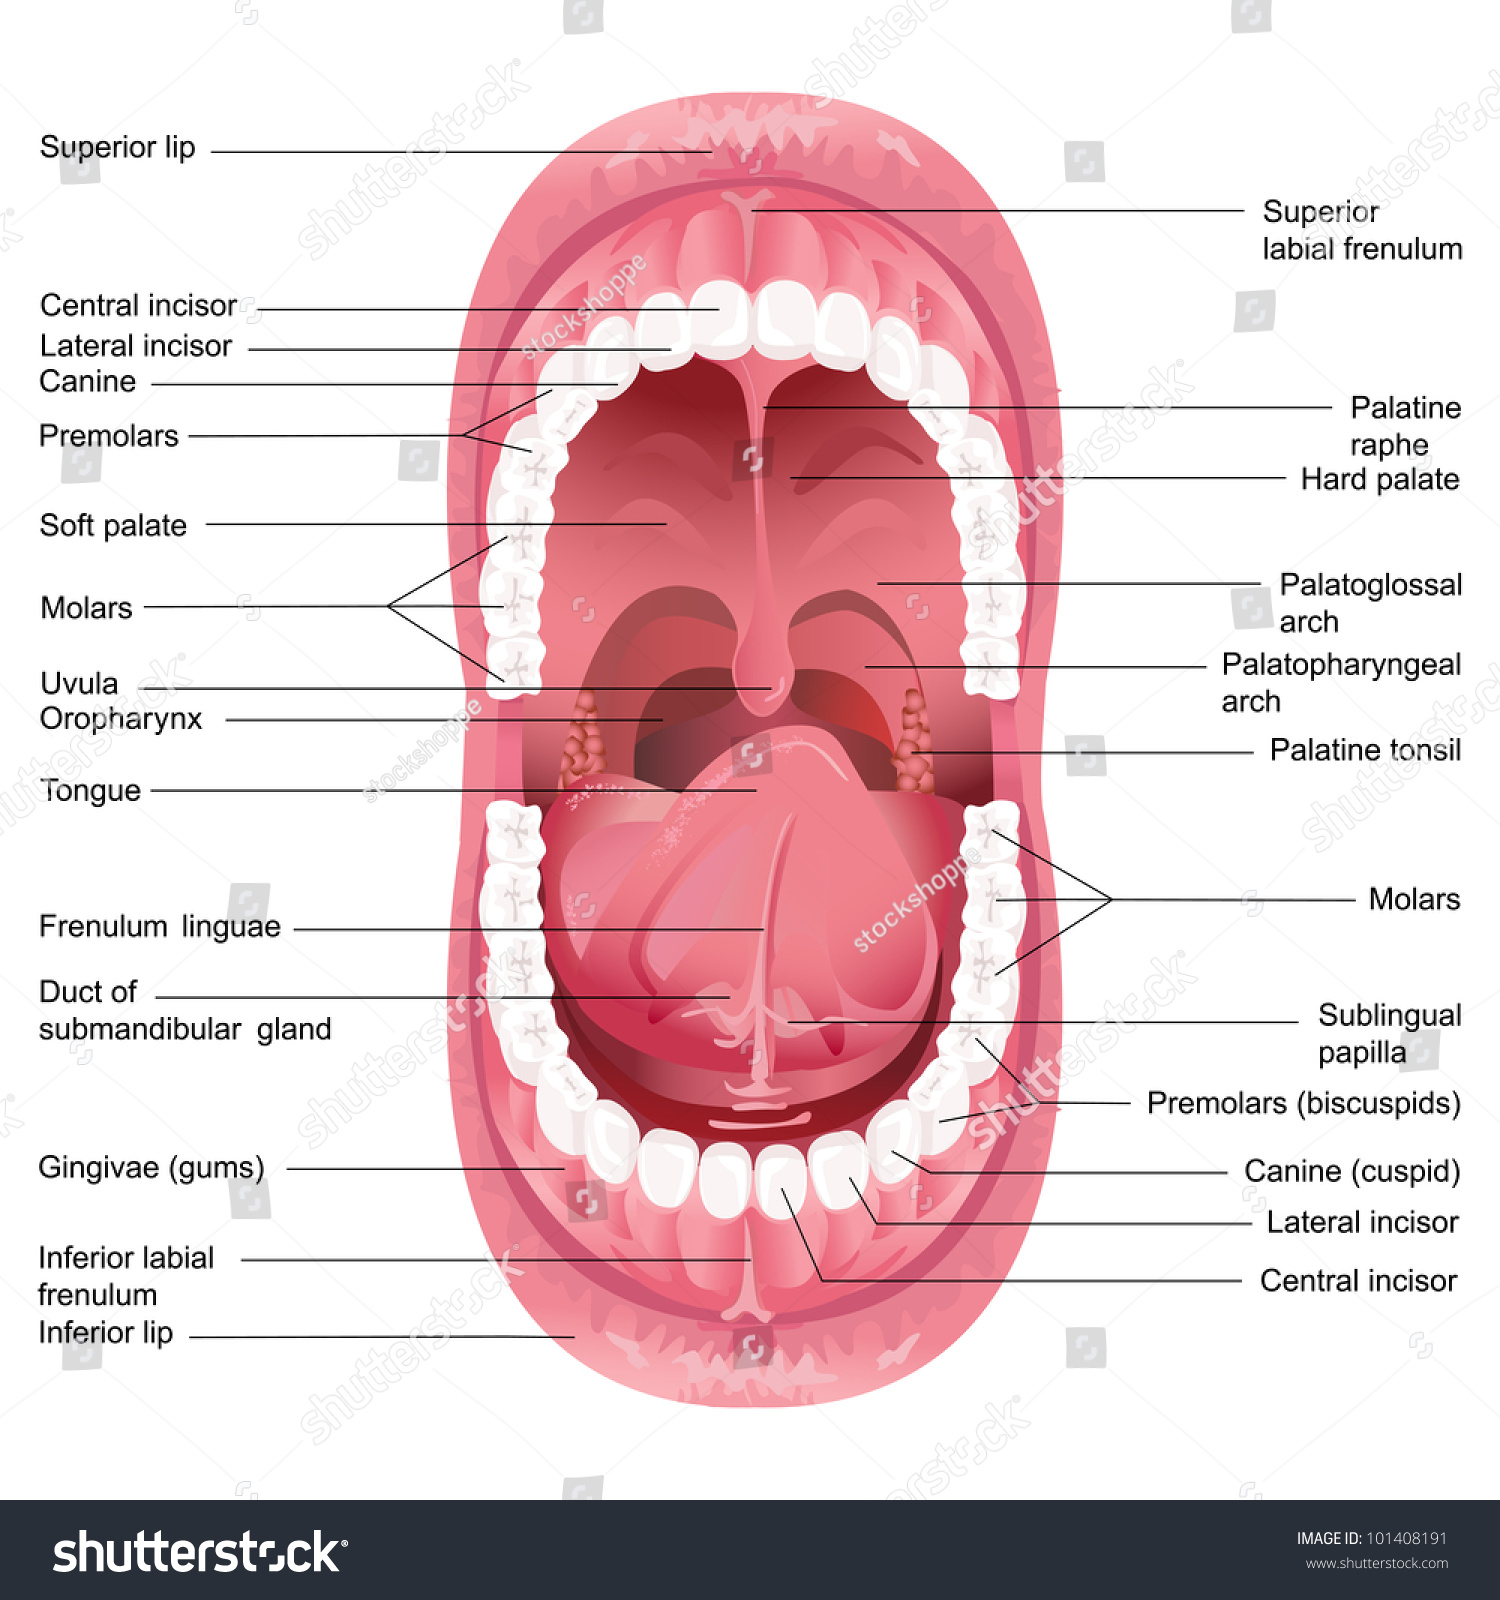 Parts Of The Human Mouth 46